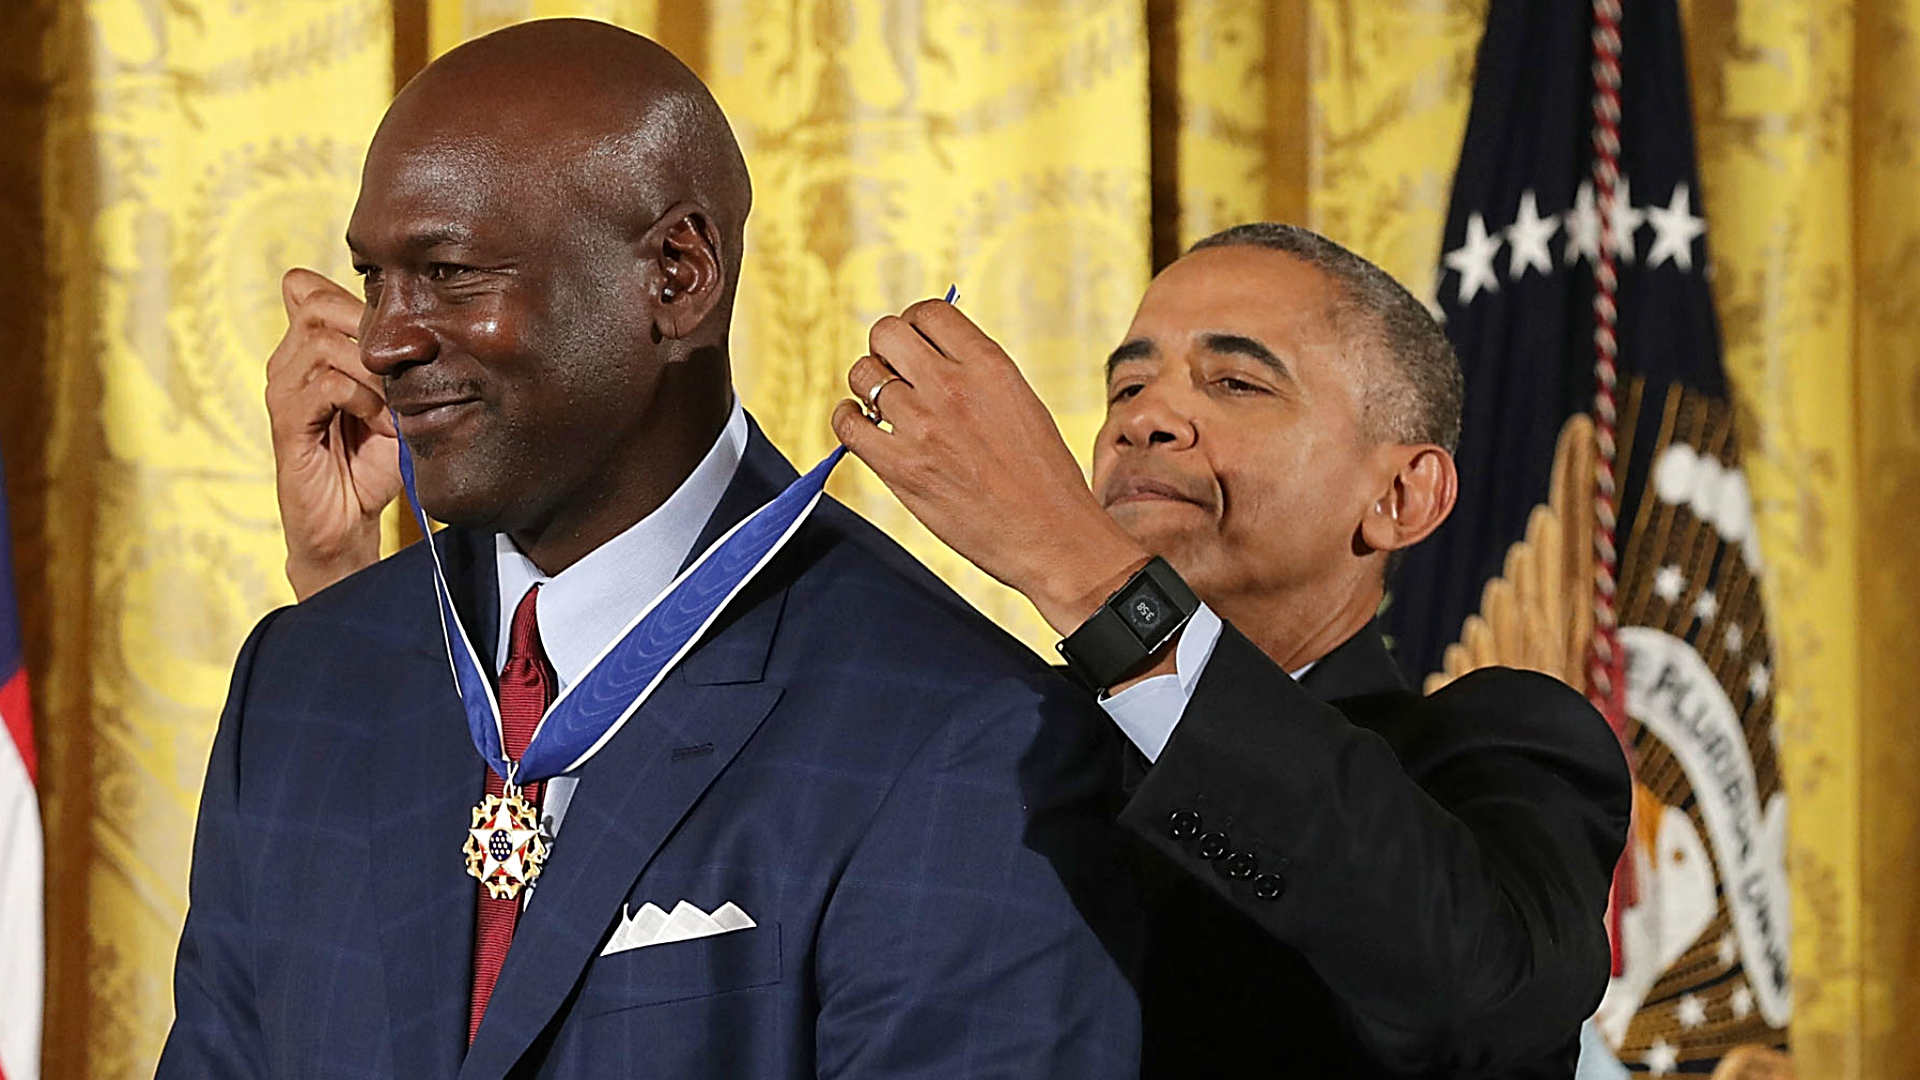 Obama presents Michael Jordan with medal freedom | Sporting